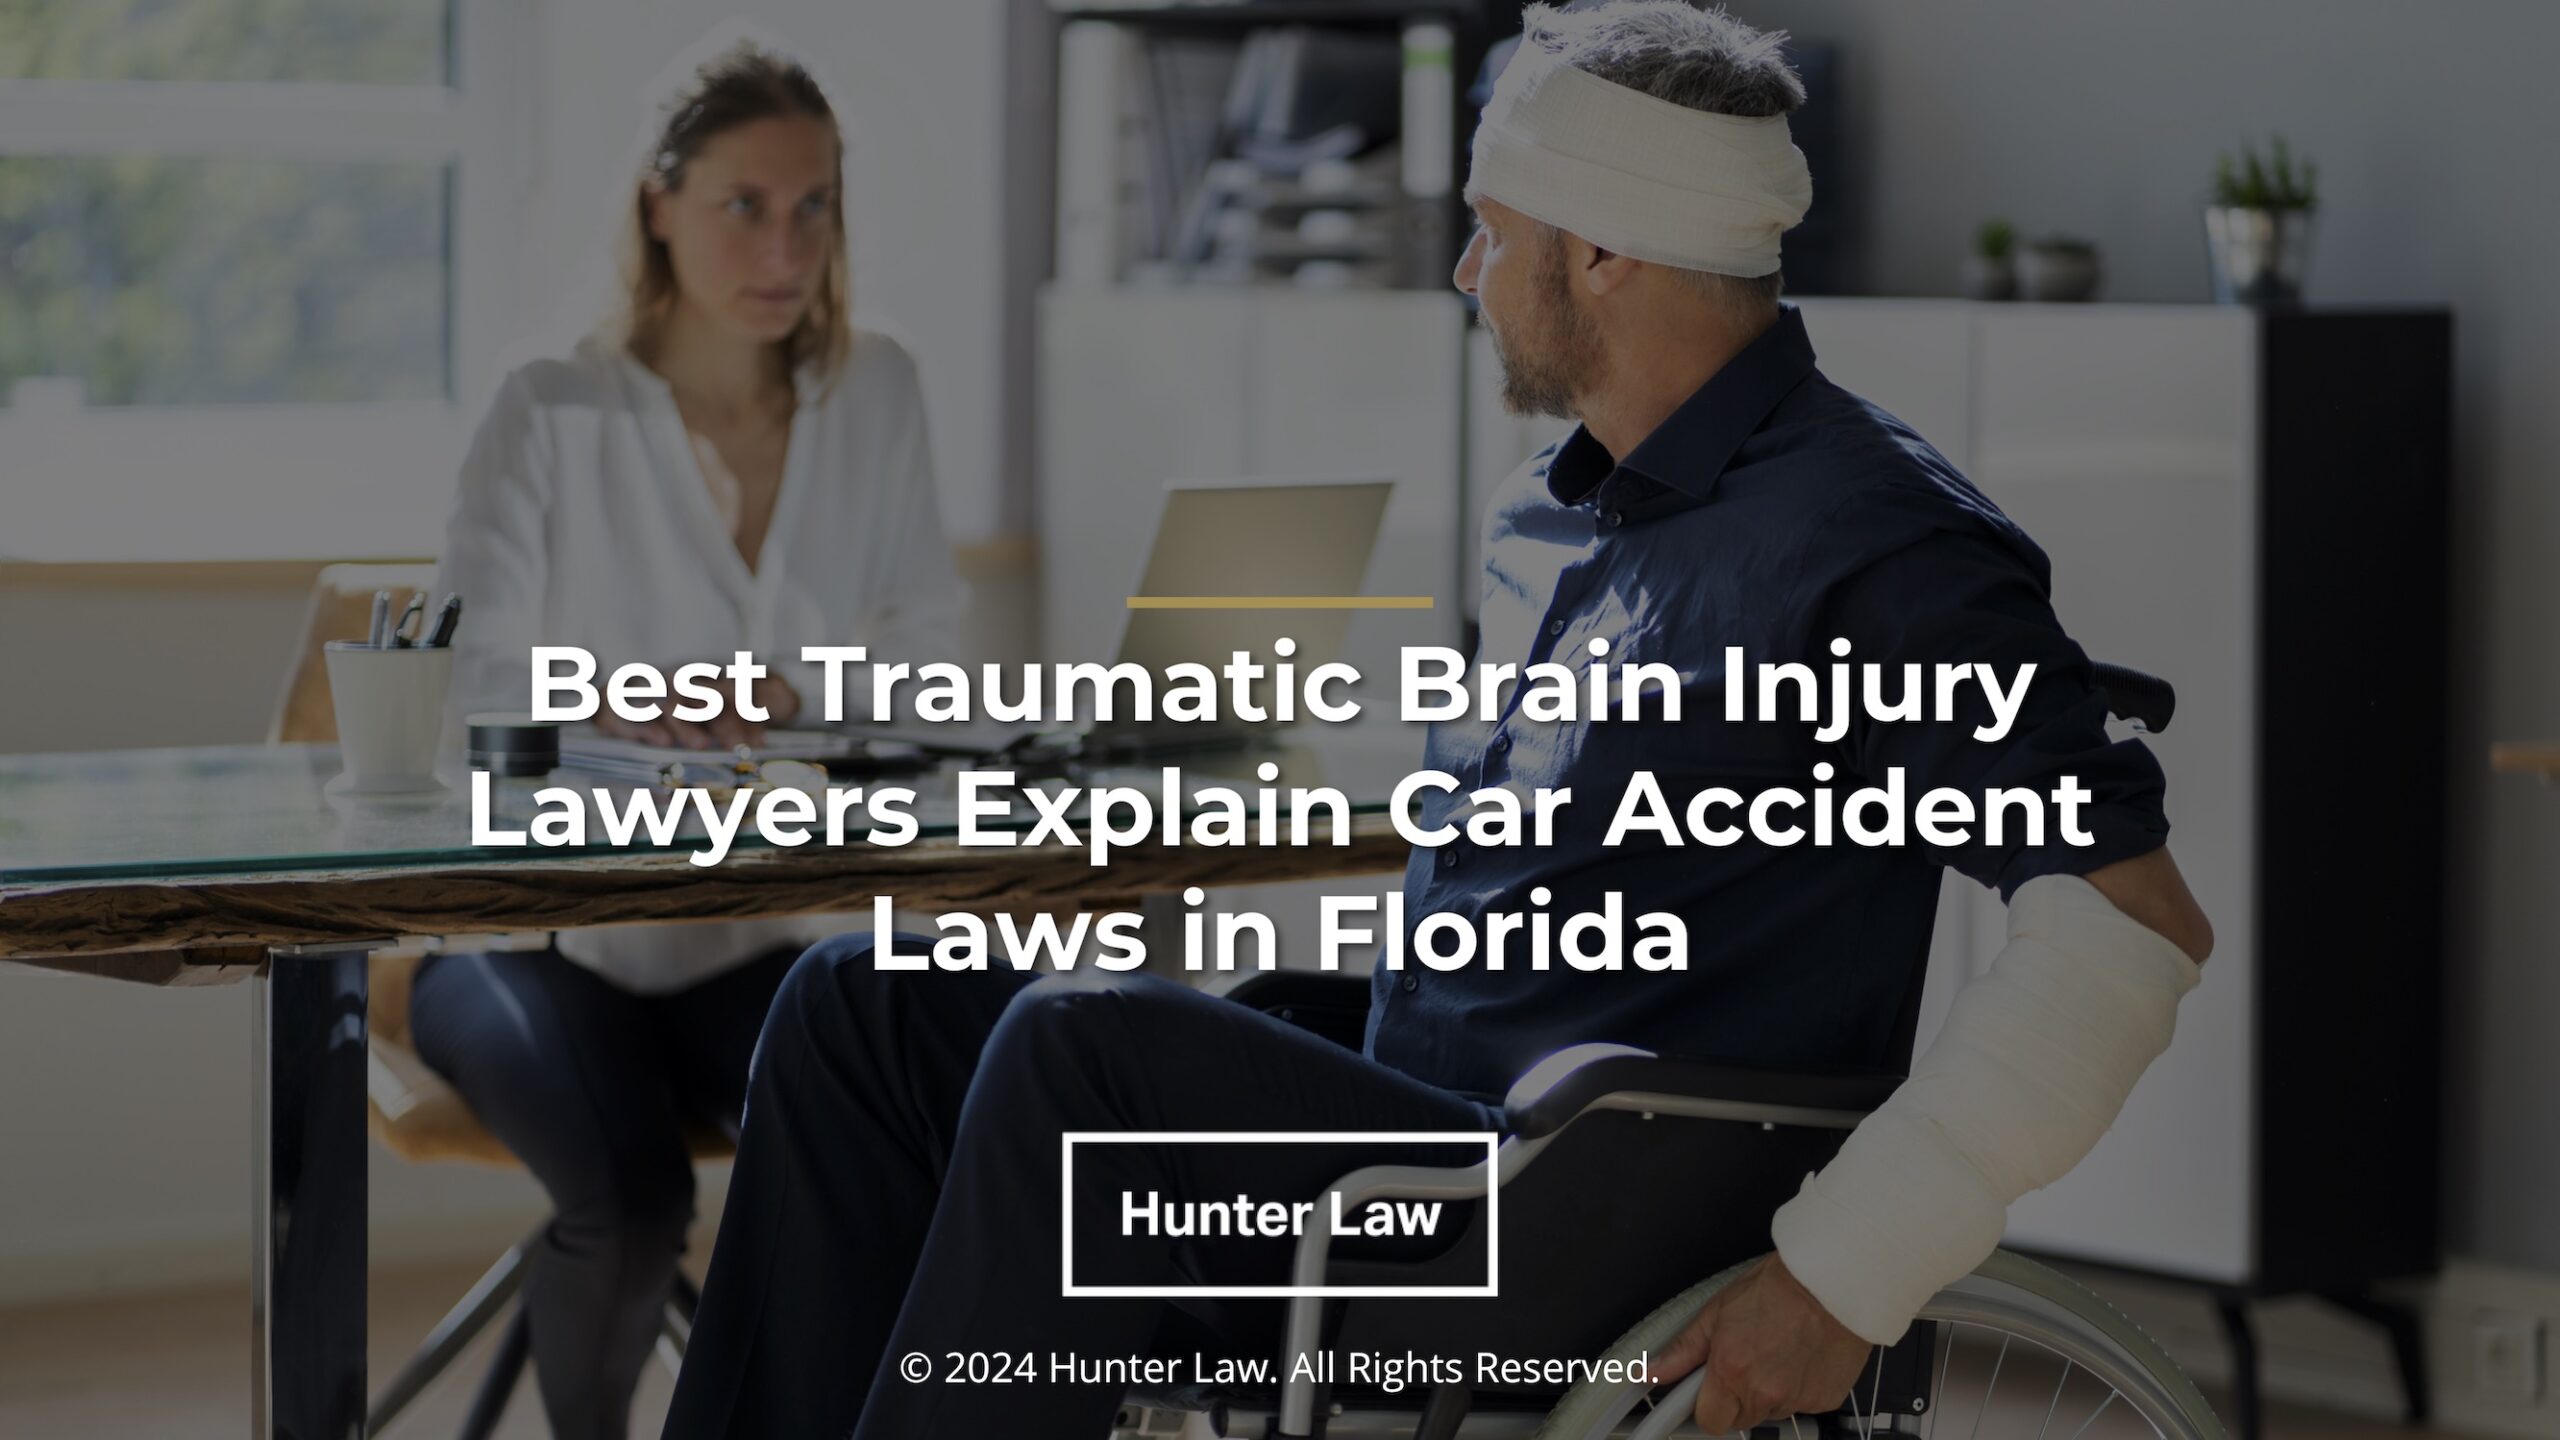 Hunter Law_Featured – Best Traumatic Brain Injury Lawyers Explain Car Accident Laws in Florida – adjusted